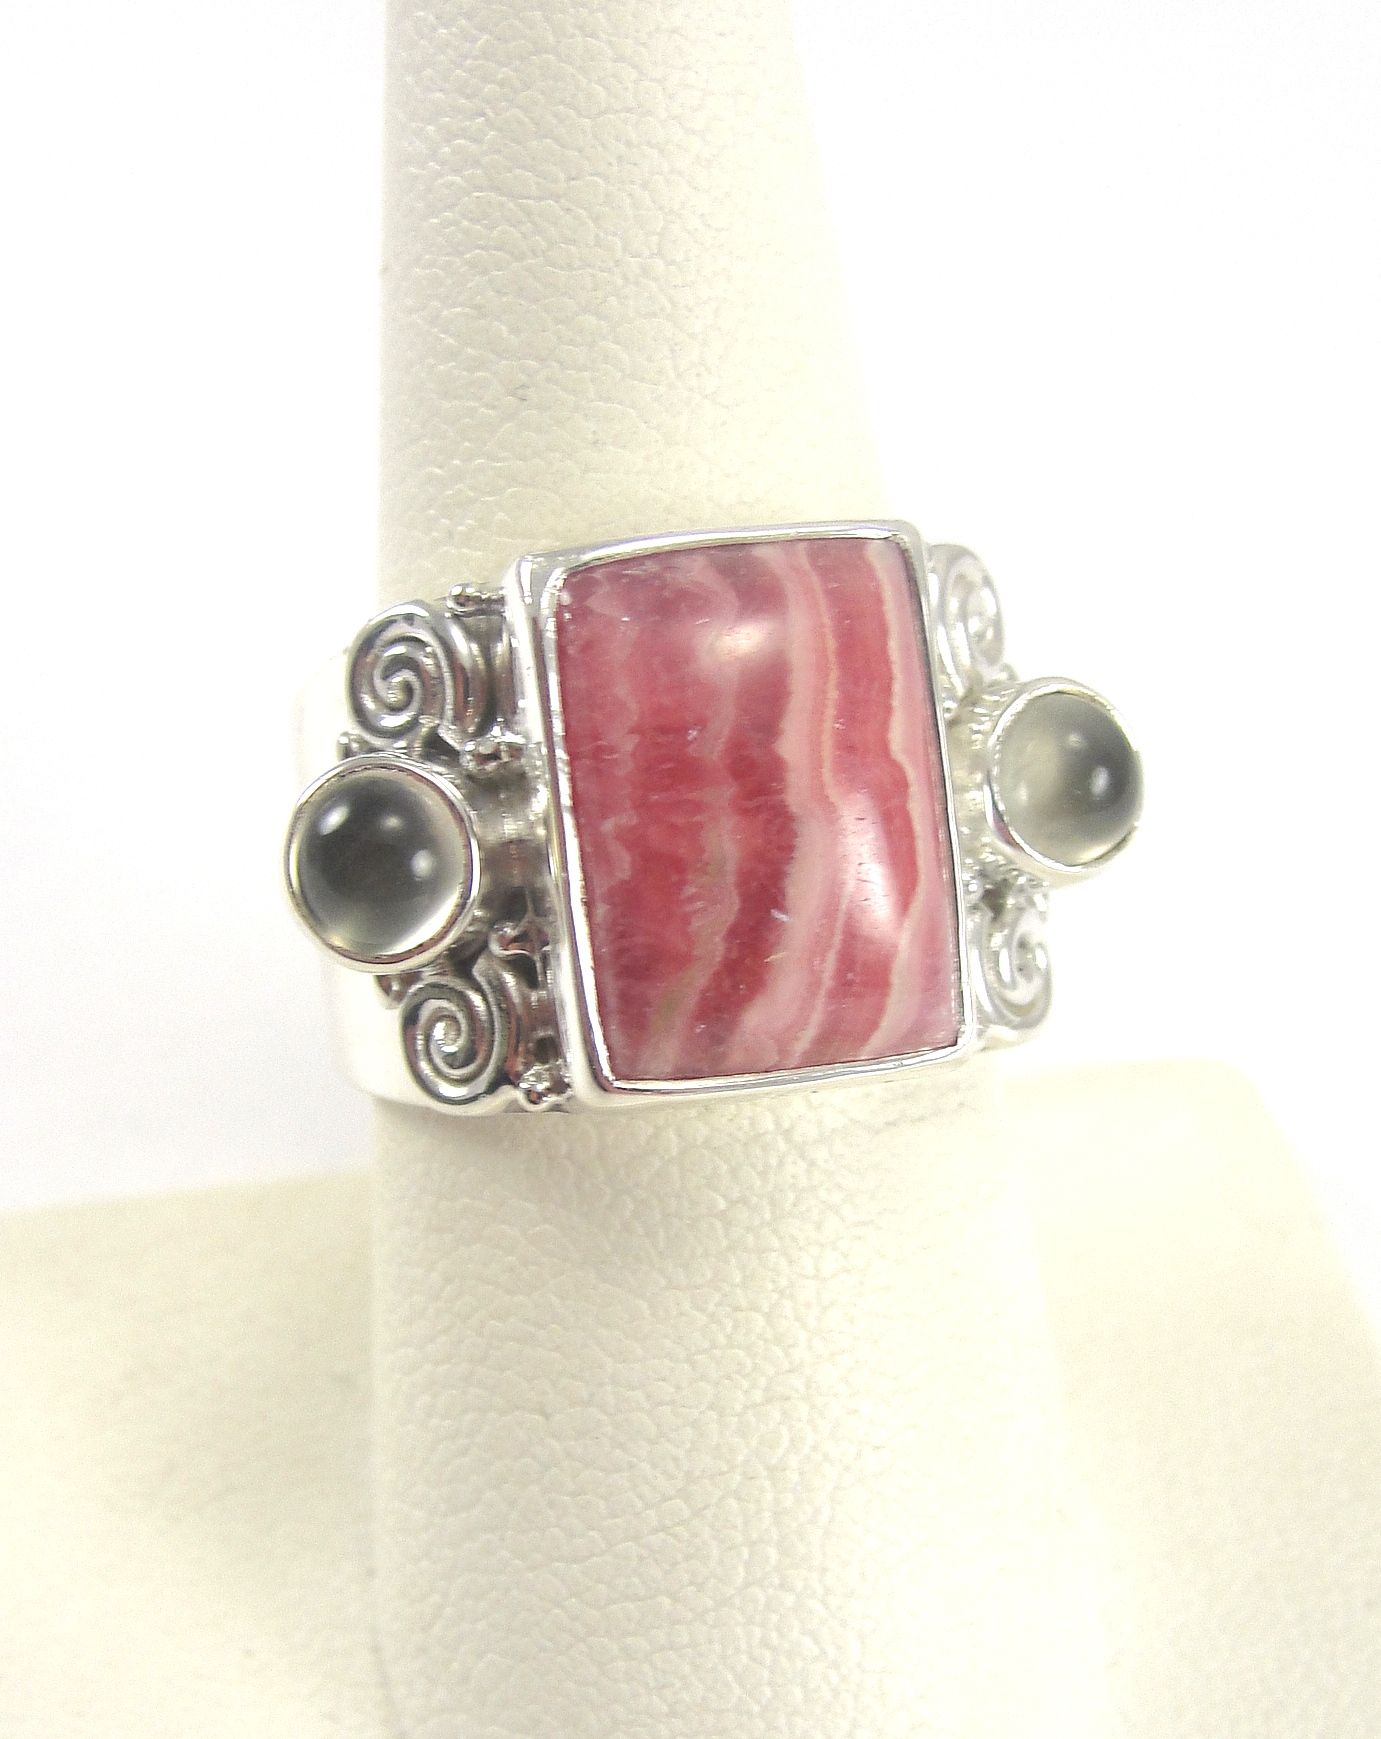 Sajen Sterling Silver Ring Pink Lace Agate Gray Cat’s Eye Size 7 1/2 